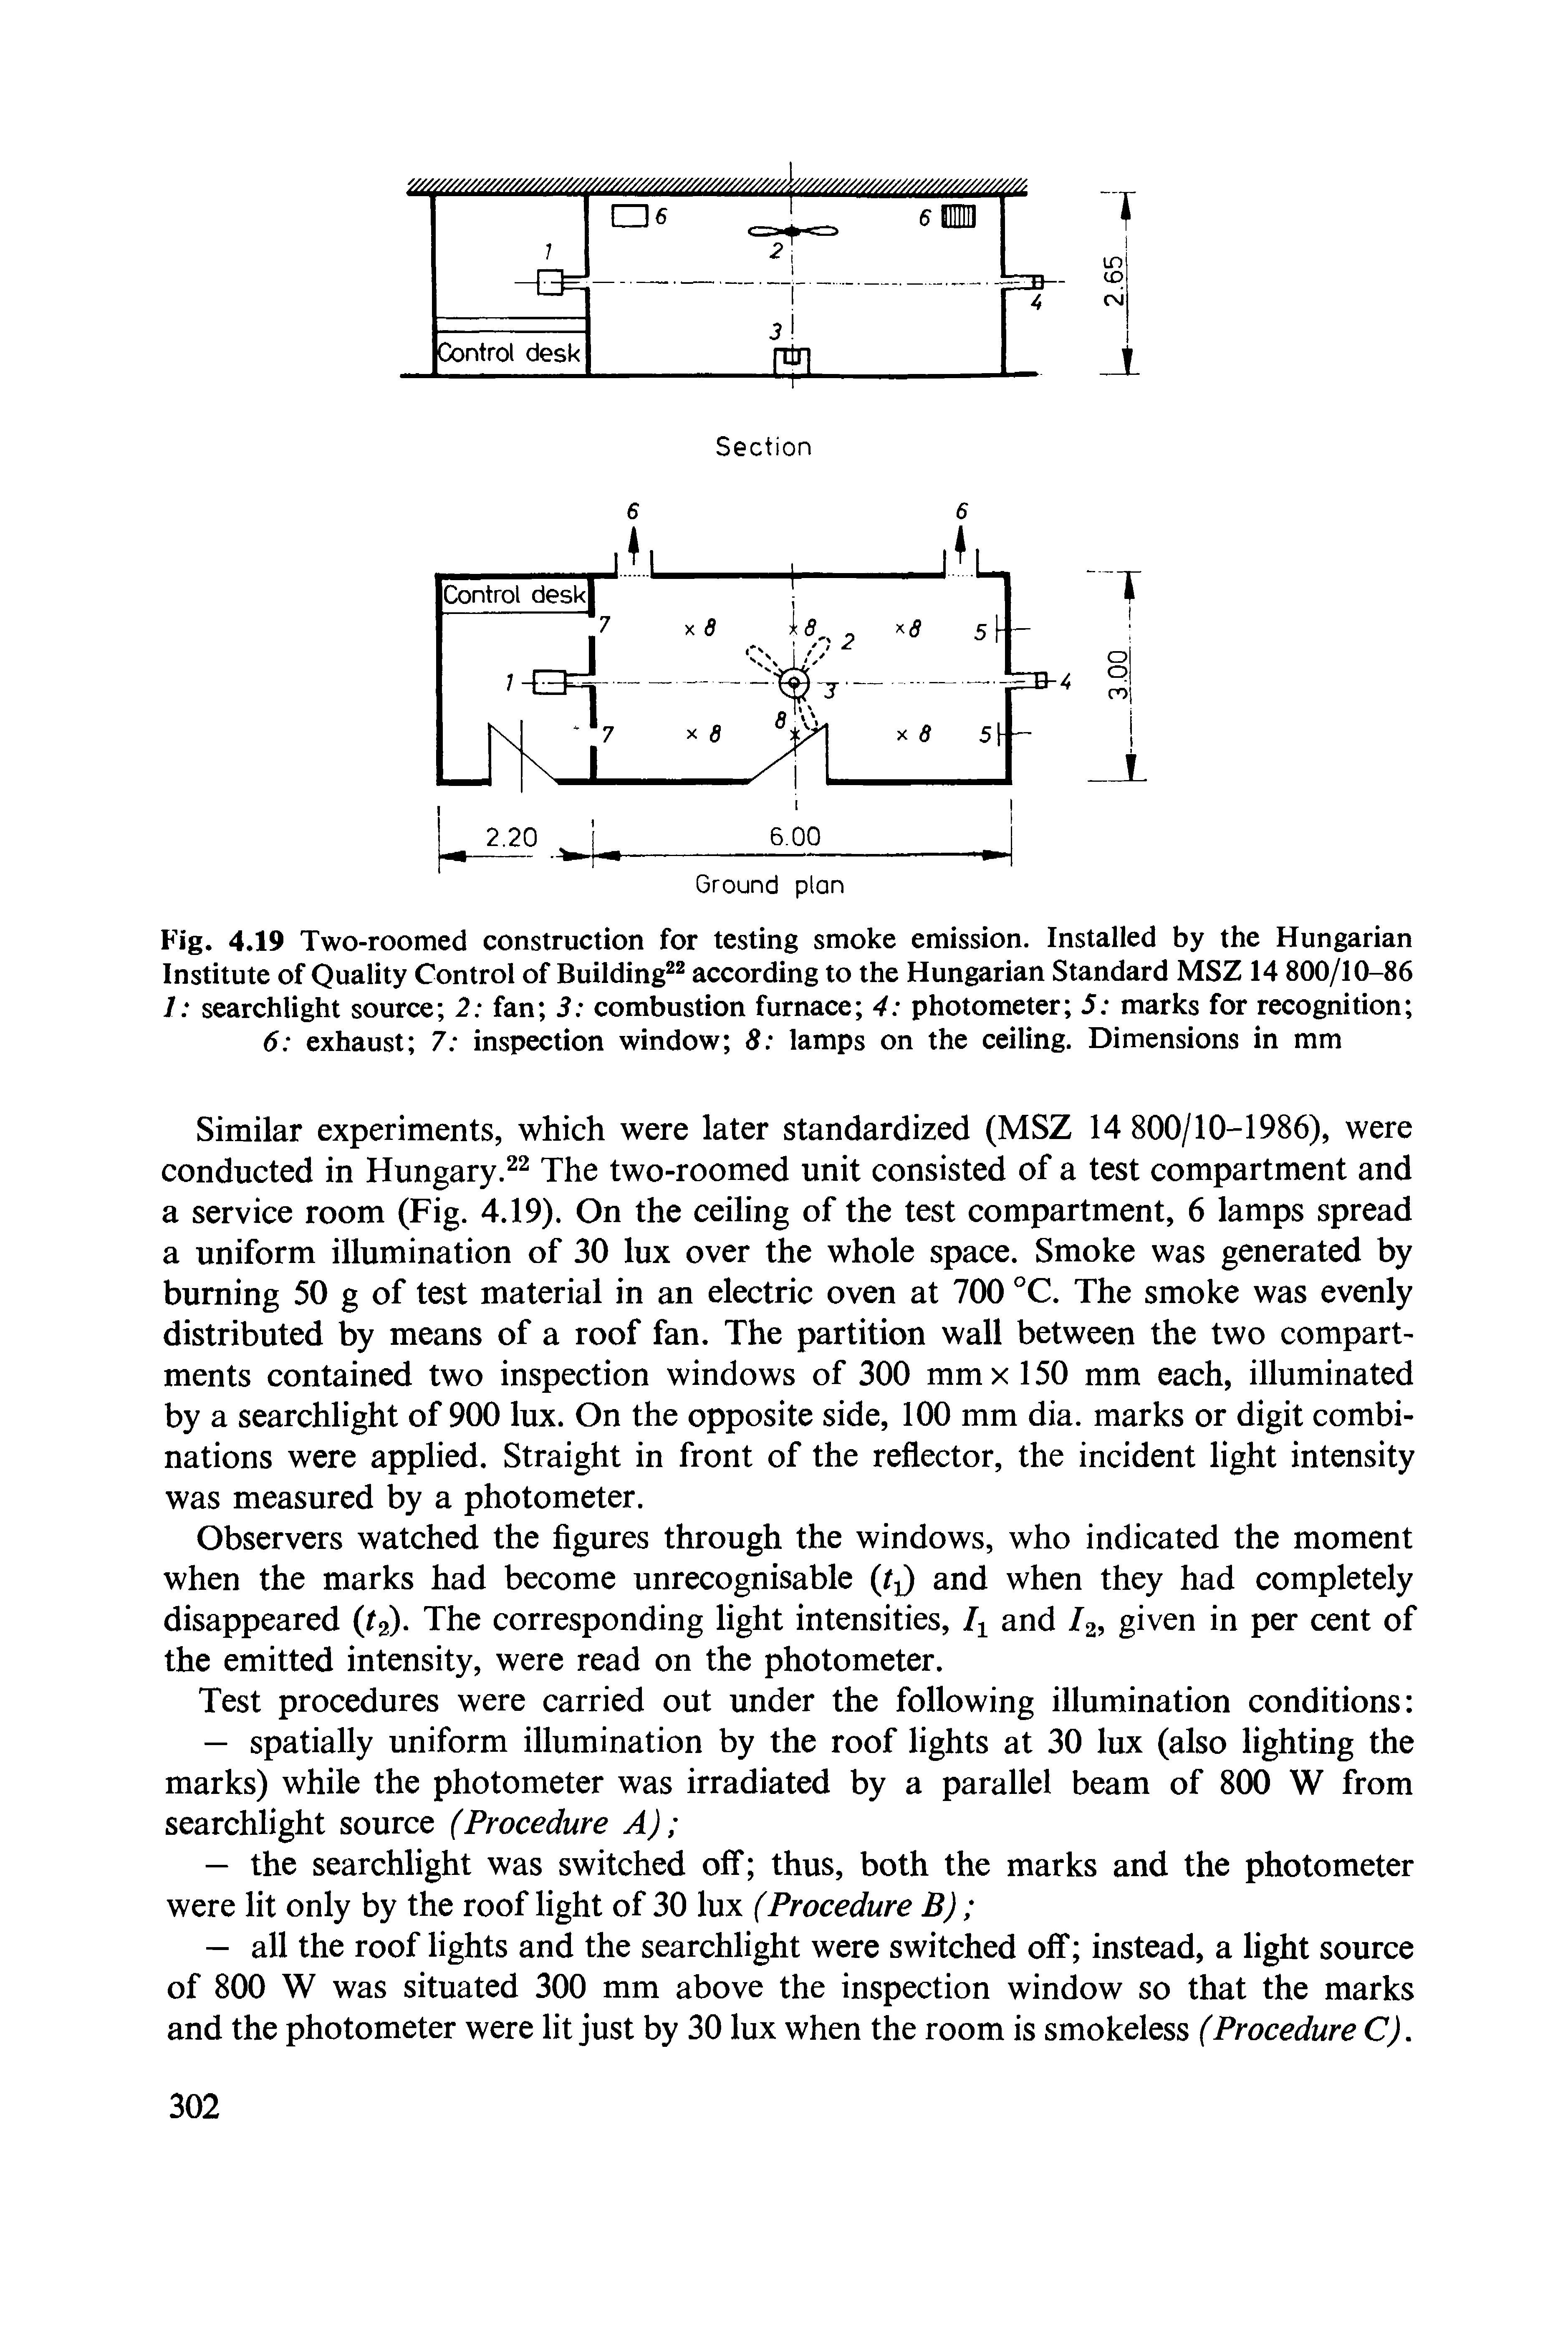 Fig. 4.19 Two-roomed construction for testing smoke emission. Installed by the Hungarian Institute of Quality Control of Building according to the Hungarian Standard MSZ 14 800/10-86 ] searchlight source 2 fan 3 combustion furnace 4 photometer 5 marks for recognition ...